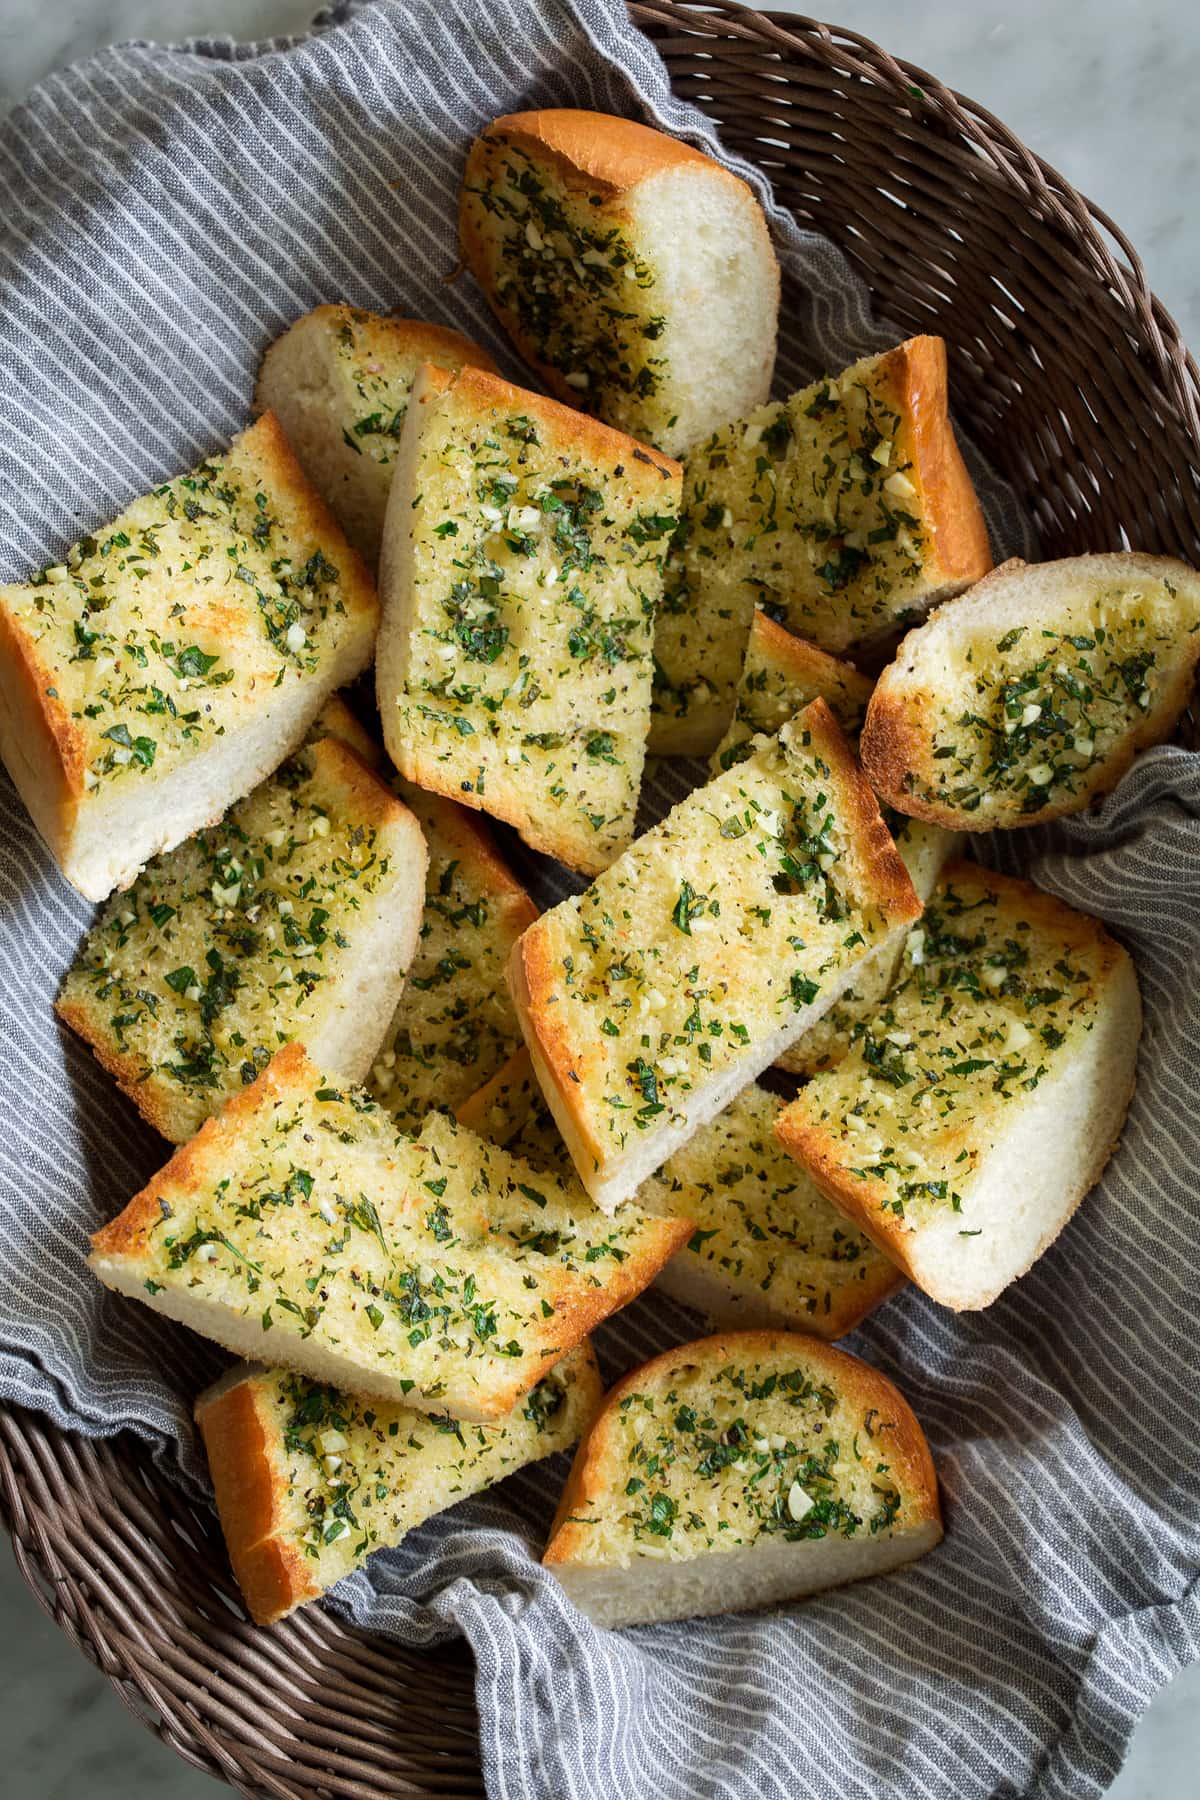 Garlic bread slices in a basket with a kitchen cloth.